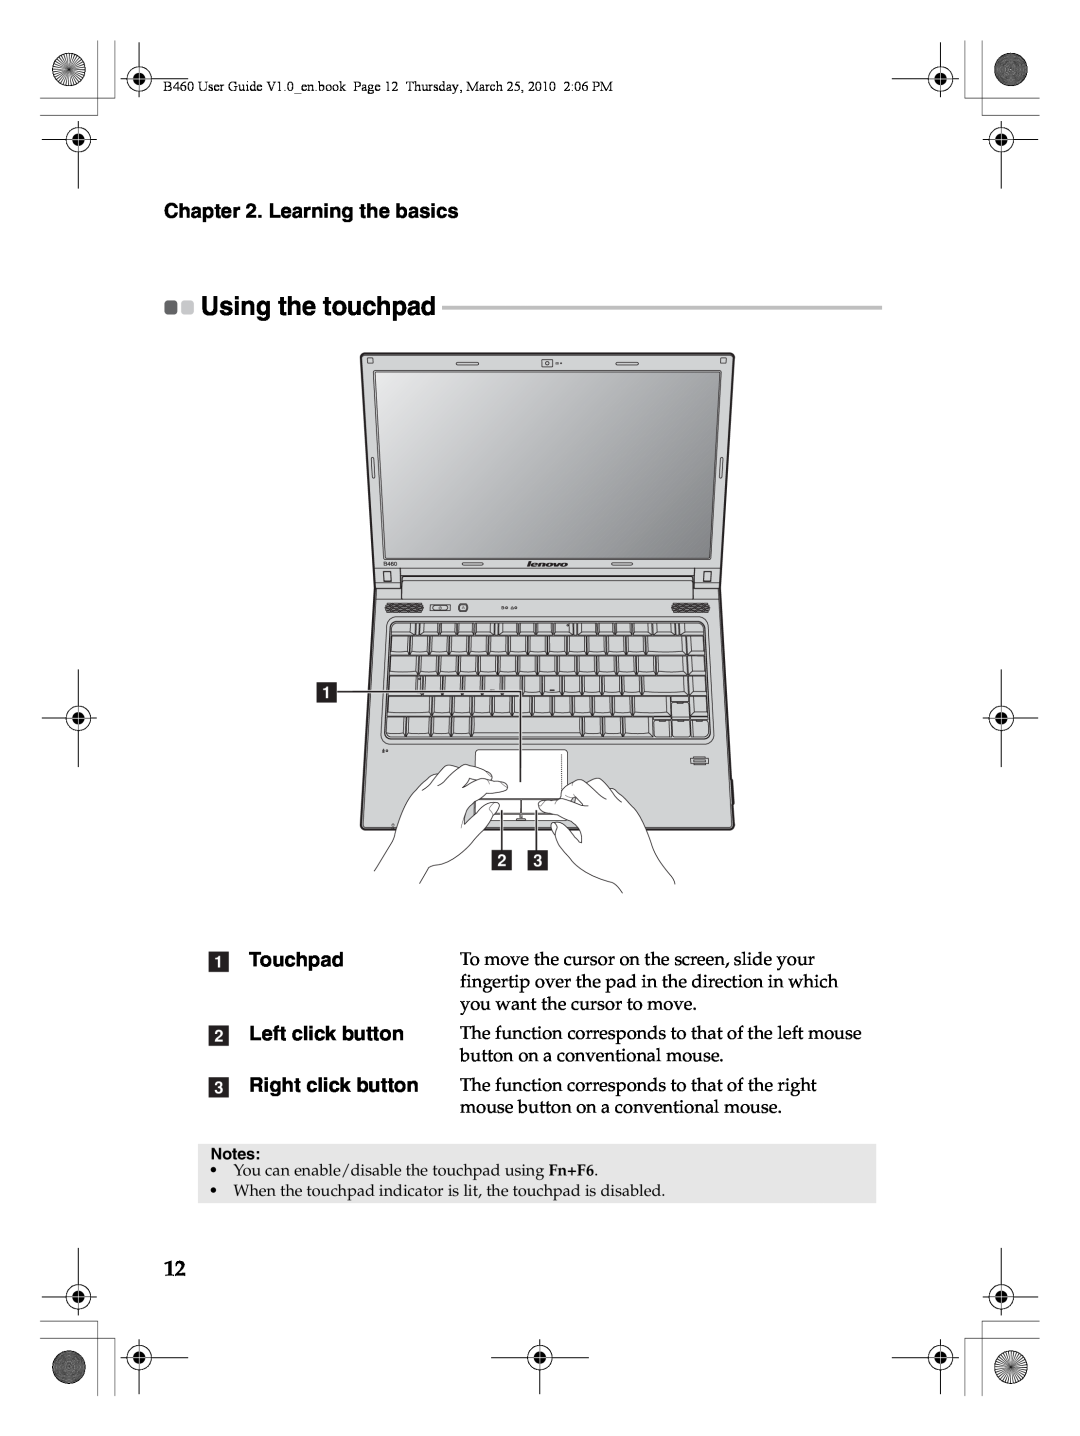 Lenovo B460 manual Using the touchpad, Learning the basics, a b c, a Touchpad 